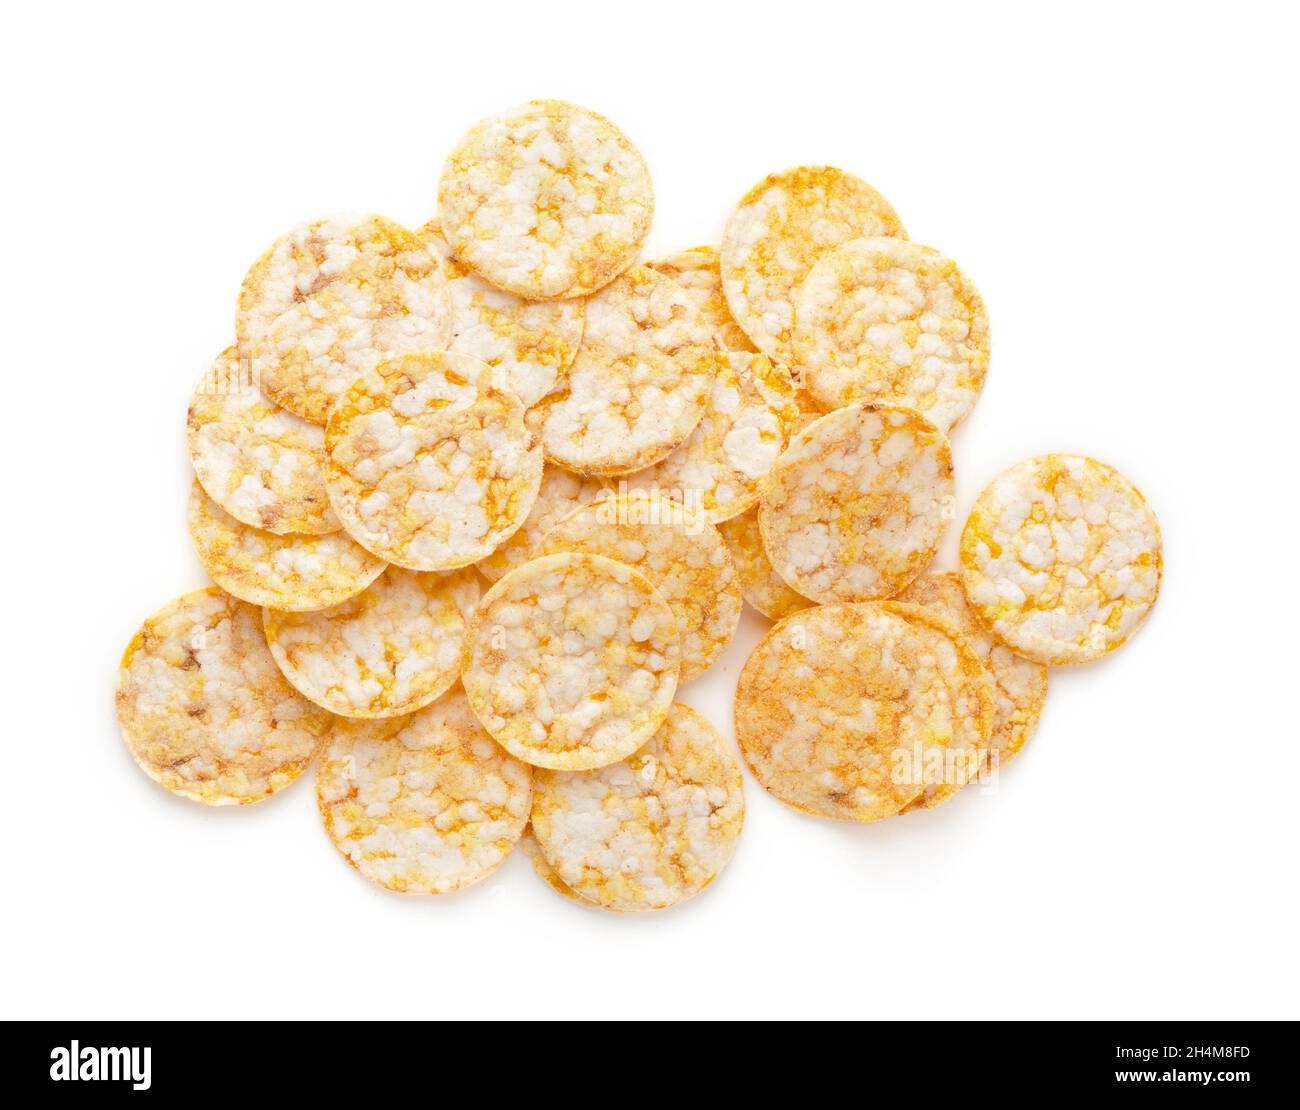 Round crunchy crispbreads isolated on a white background. Round shaped cereal bread, healthy food without yeast. Puffed multigrain crispbreads for die Stock Photo